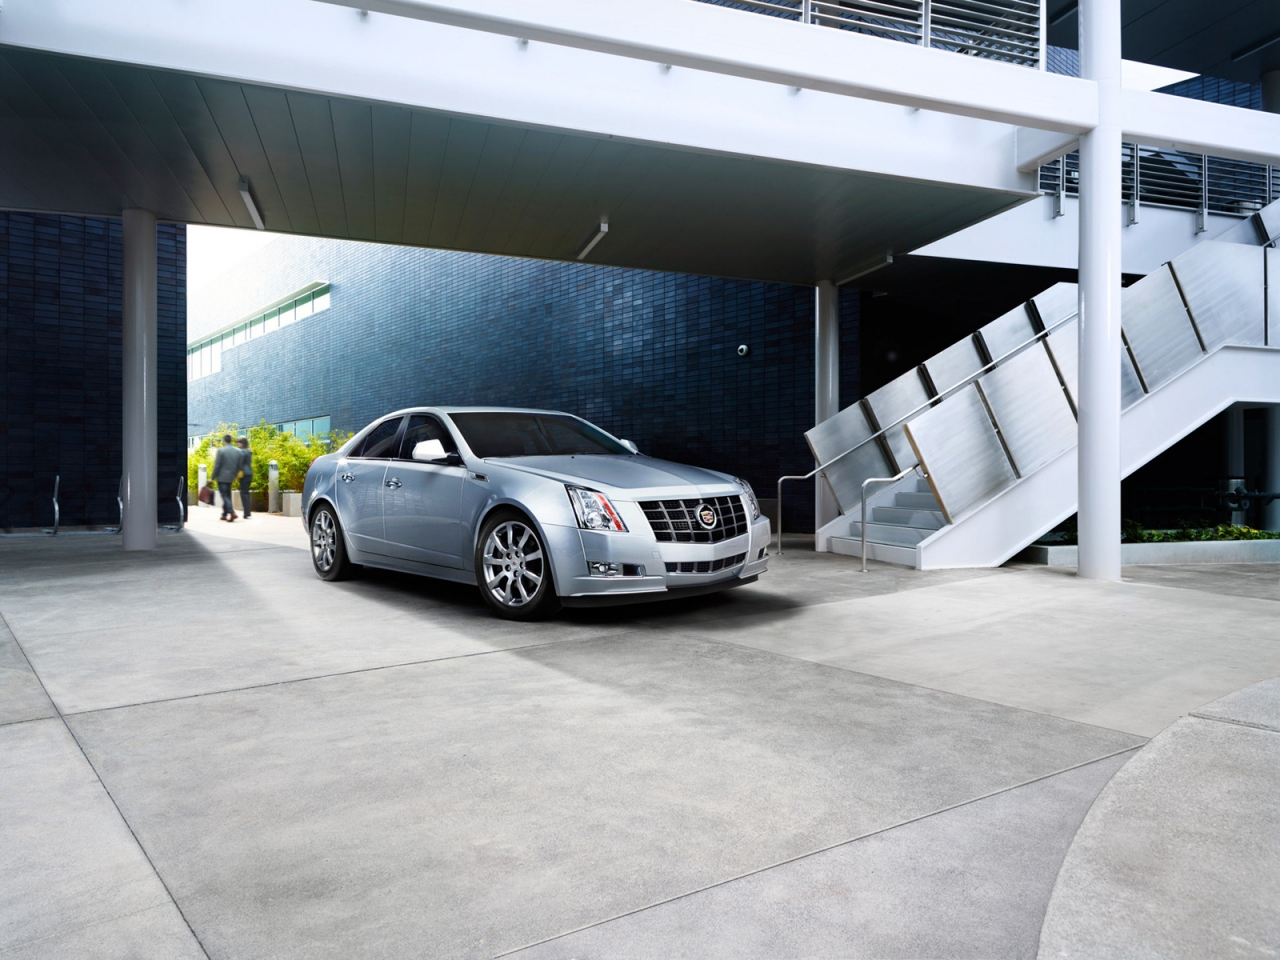 2012 Cadillac CTS Touring Edition for 1280 x 960 resolution